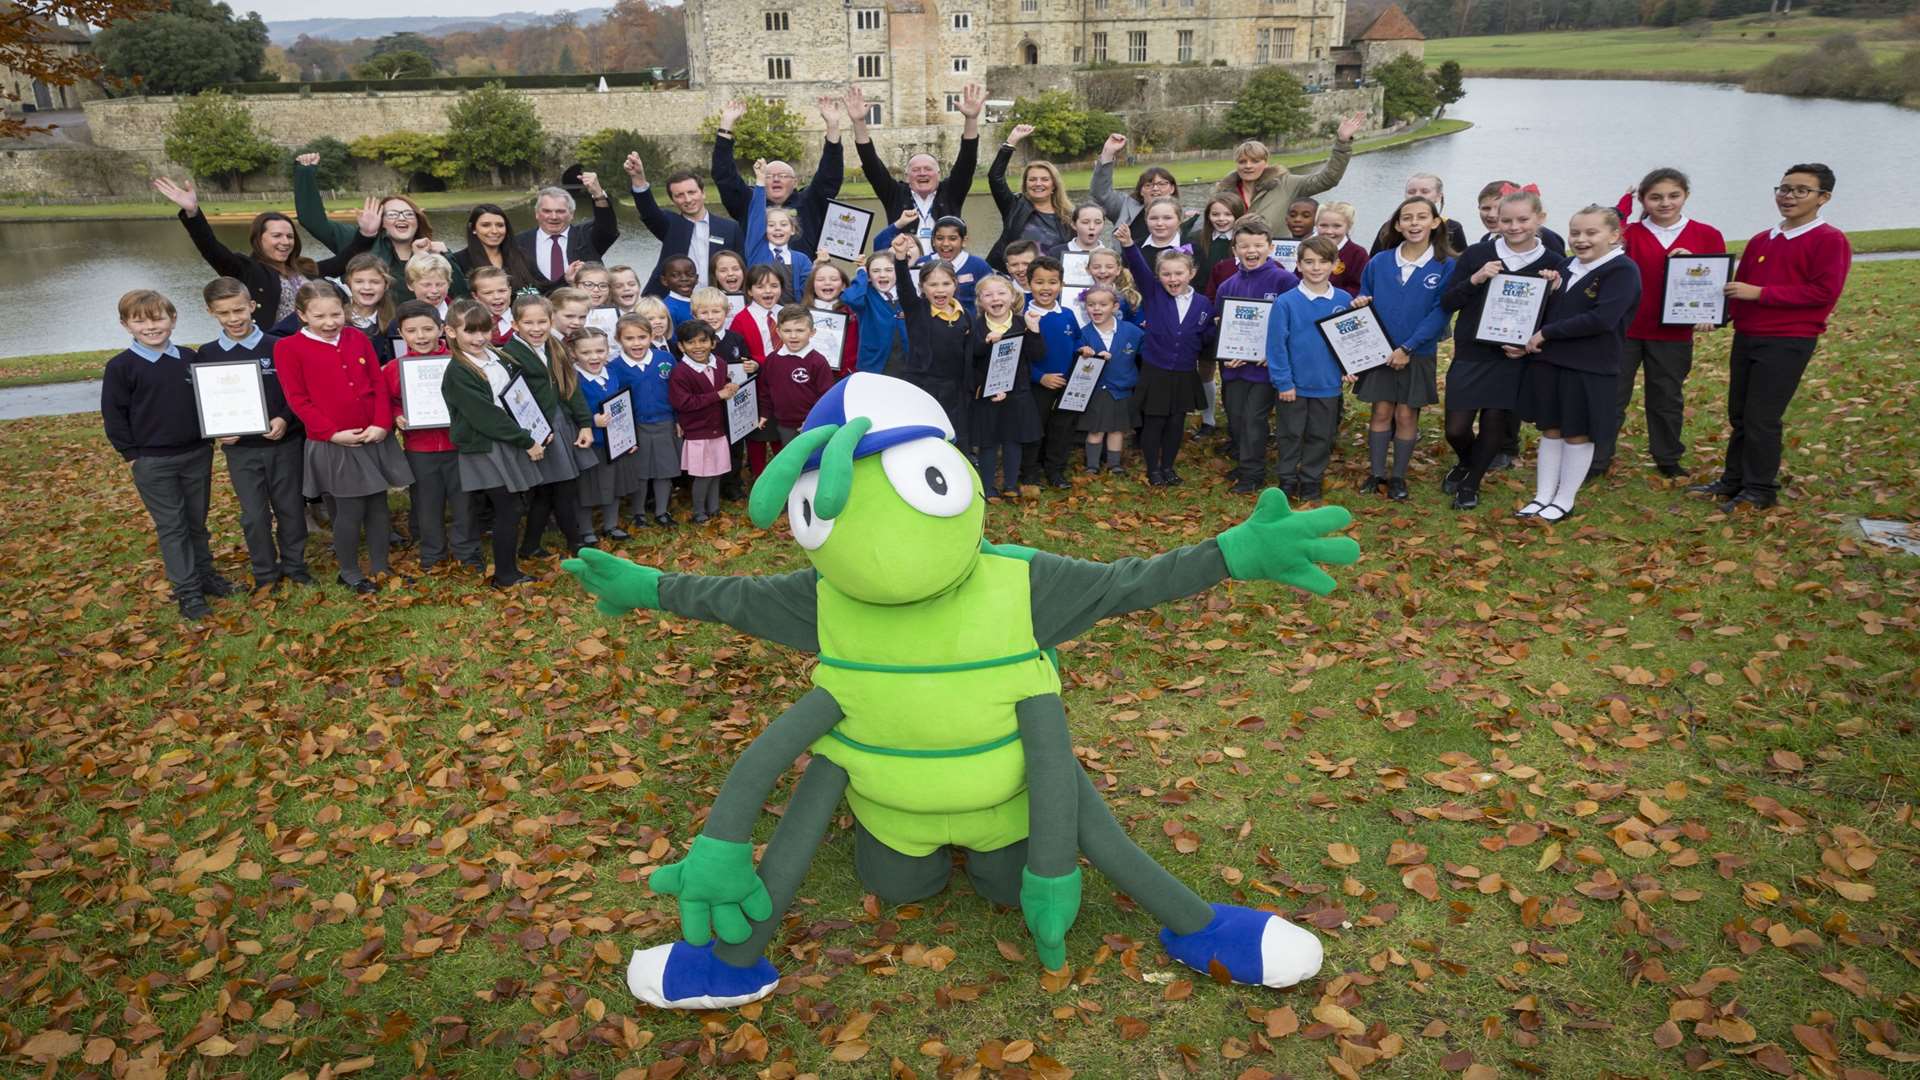 All winners, supporters, and mascot Buster Bug at walk to school and literacy challenge winners presentation at Leeds Castle, Maidstone.